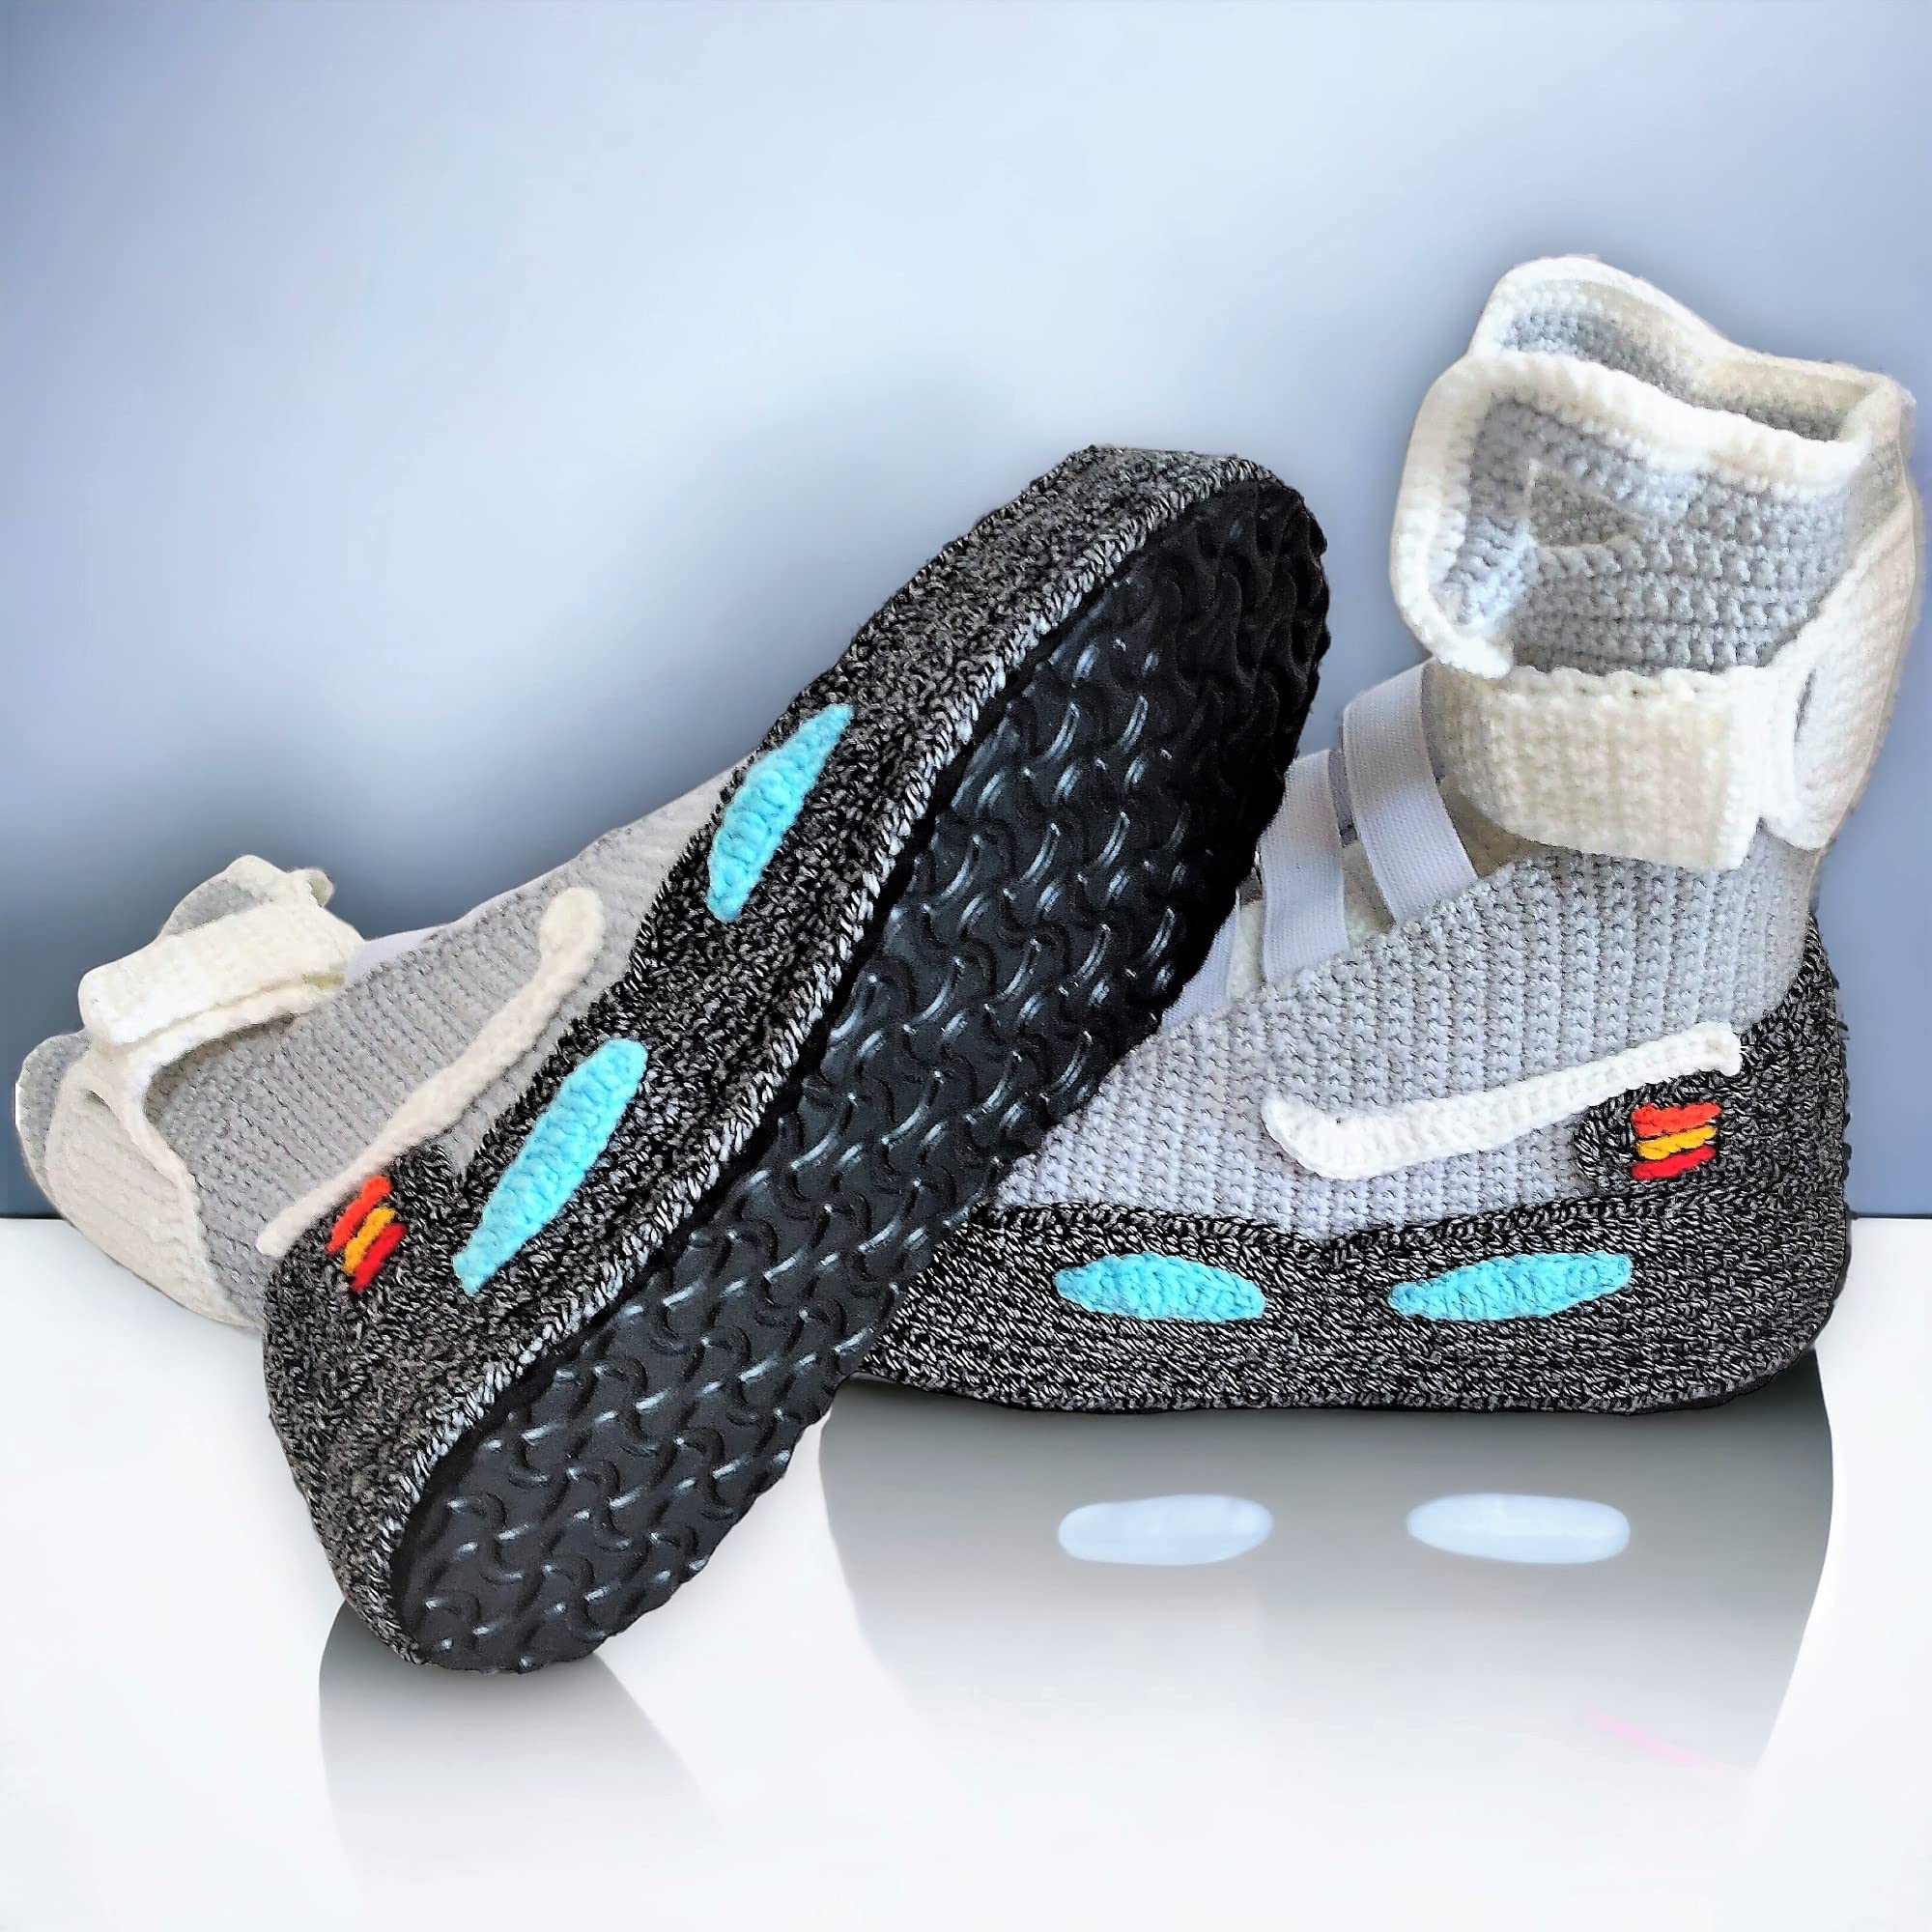 Back To The Future Air Mags Sneakers Slippers Knitted Crochet Custom Marty McFly Plush Shoes Socks